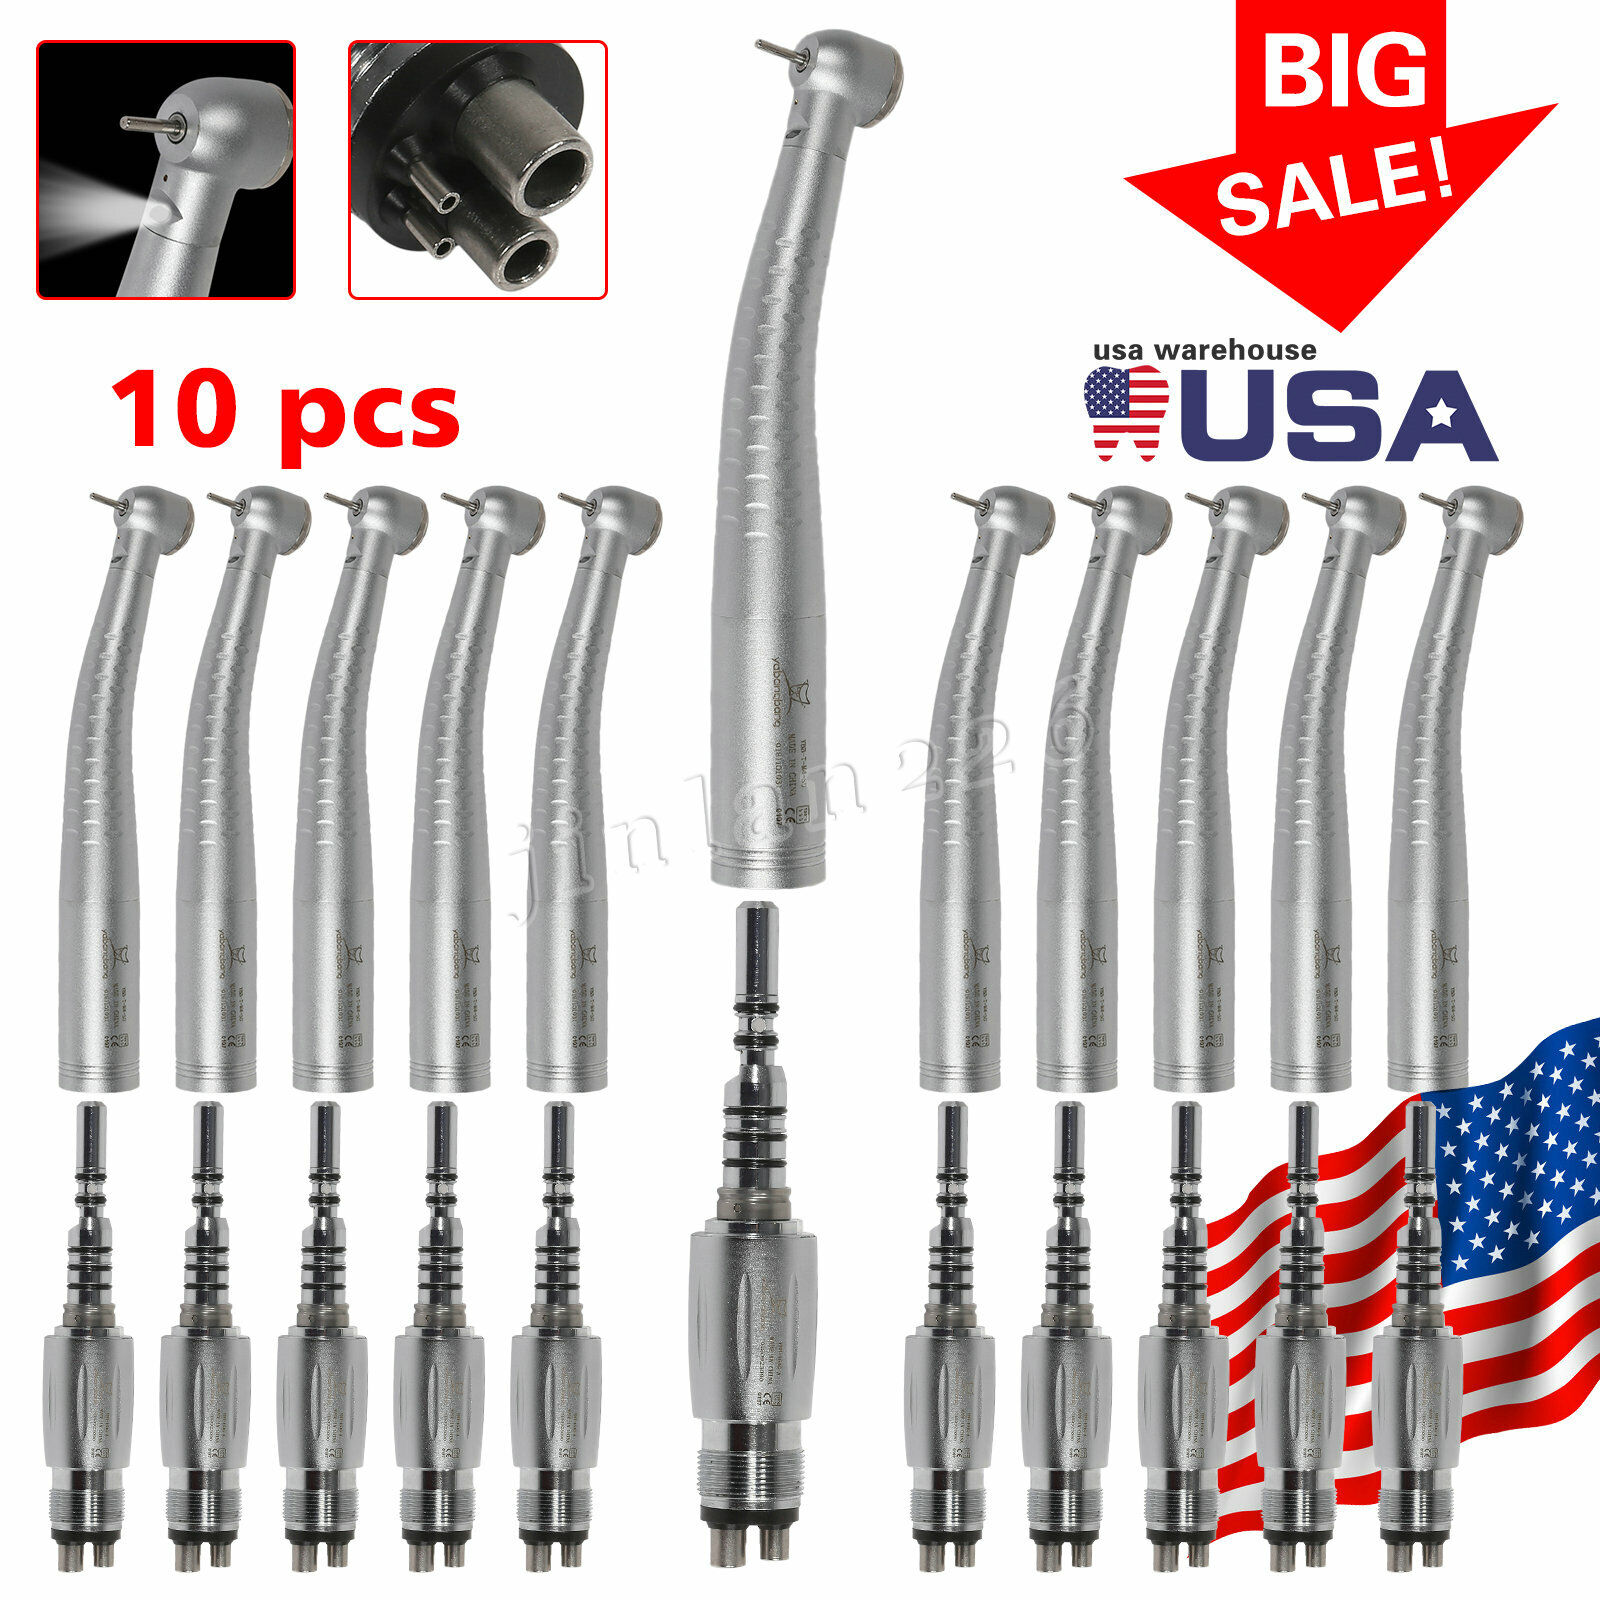 10 PCS Large Head OFFicial Raleigh Mall Dental Fiber Quick Handpiece with Optic 4Hole